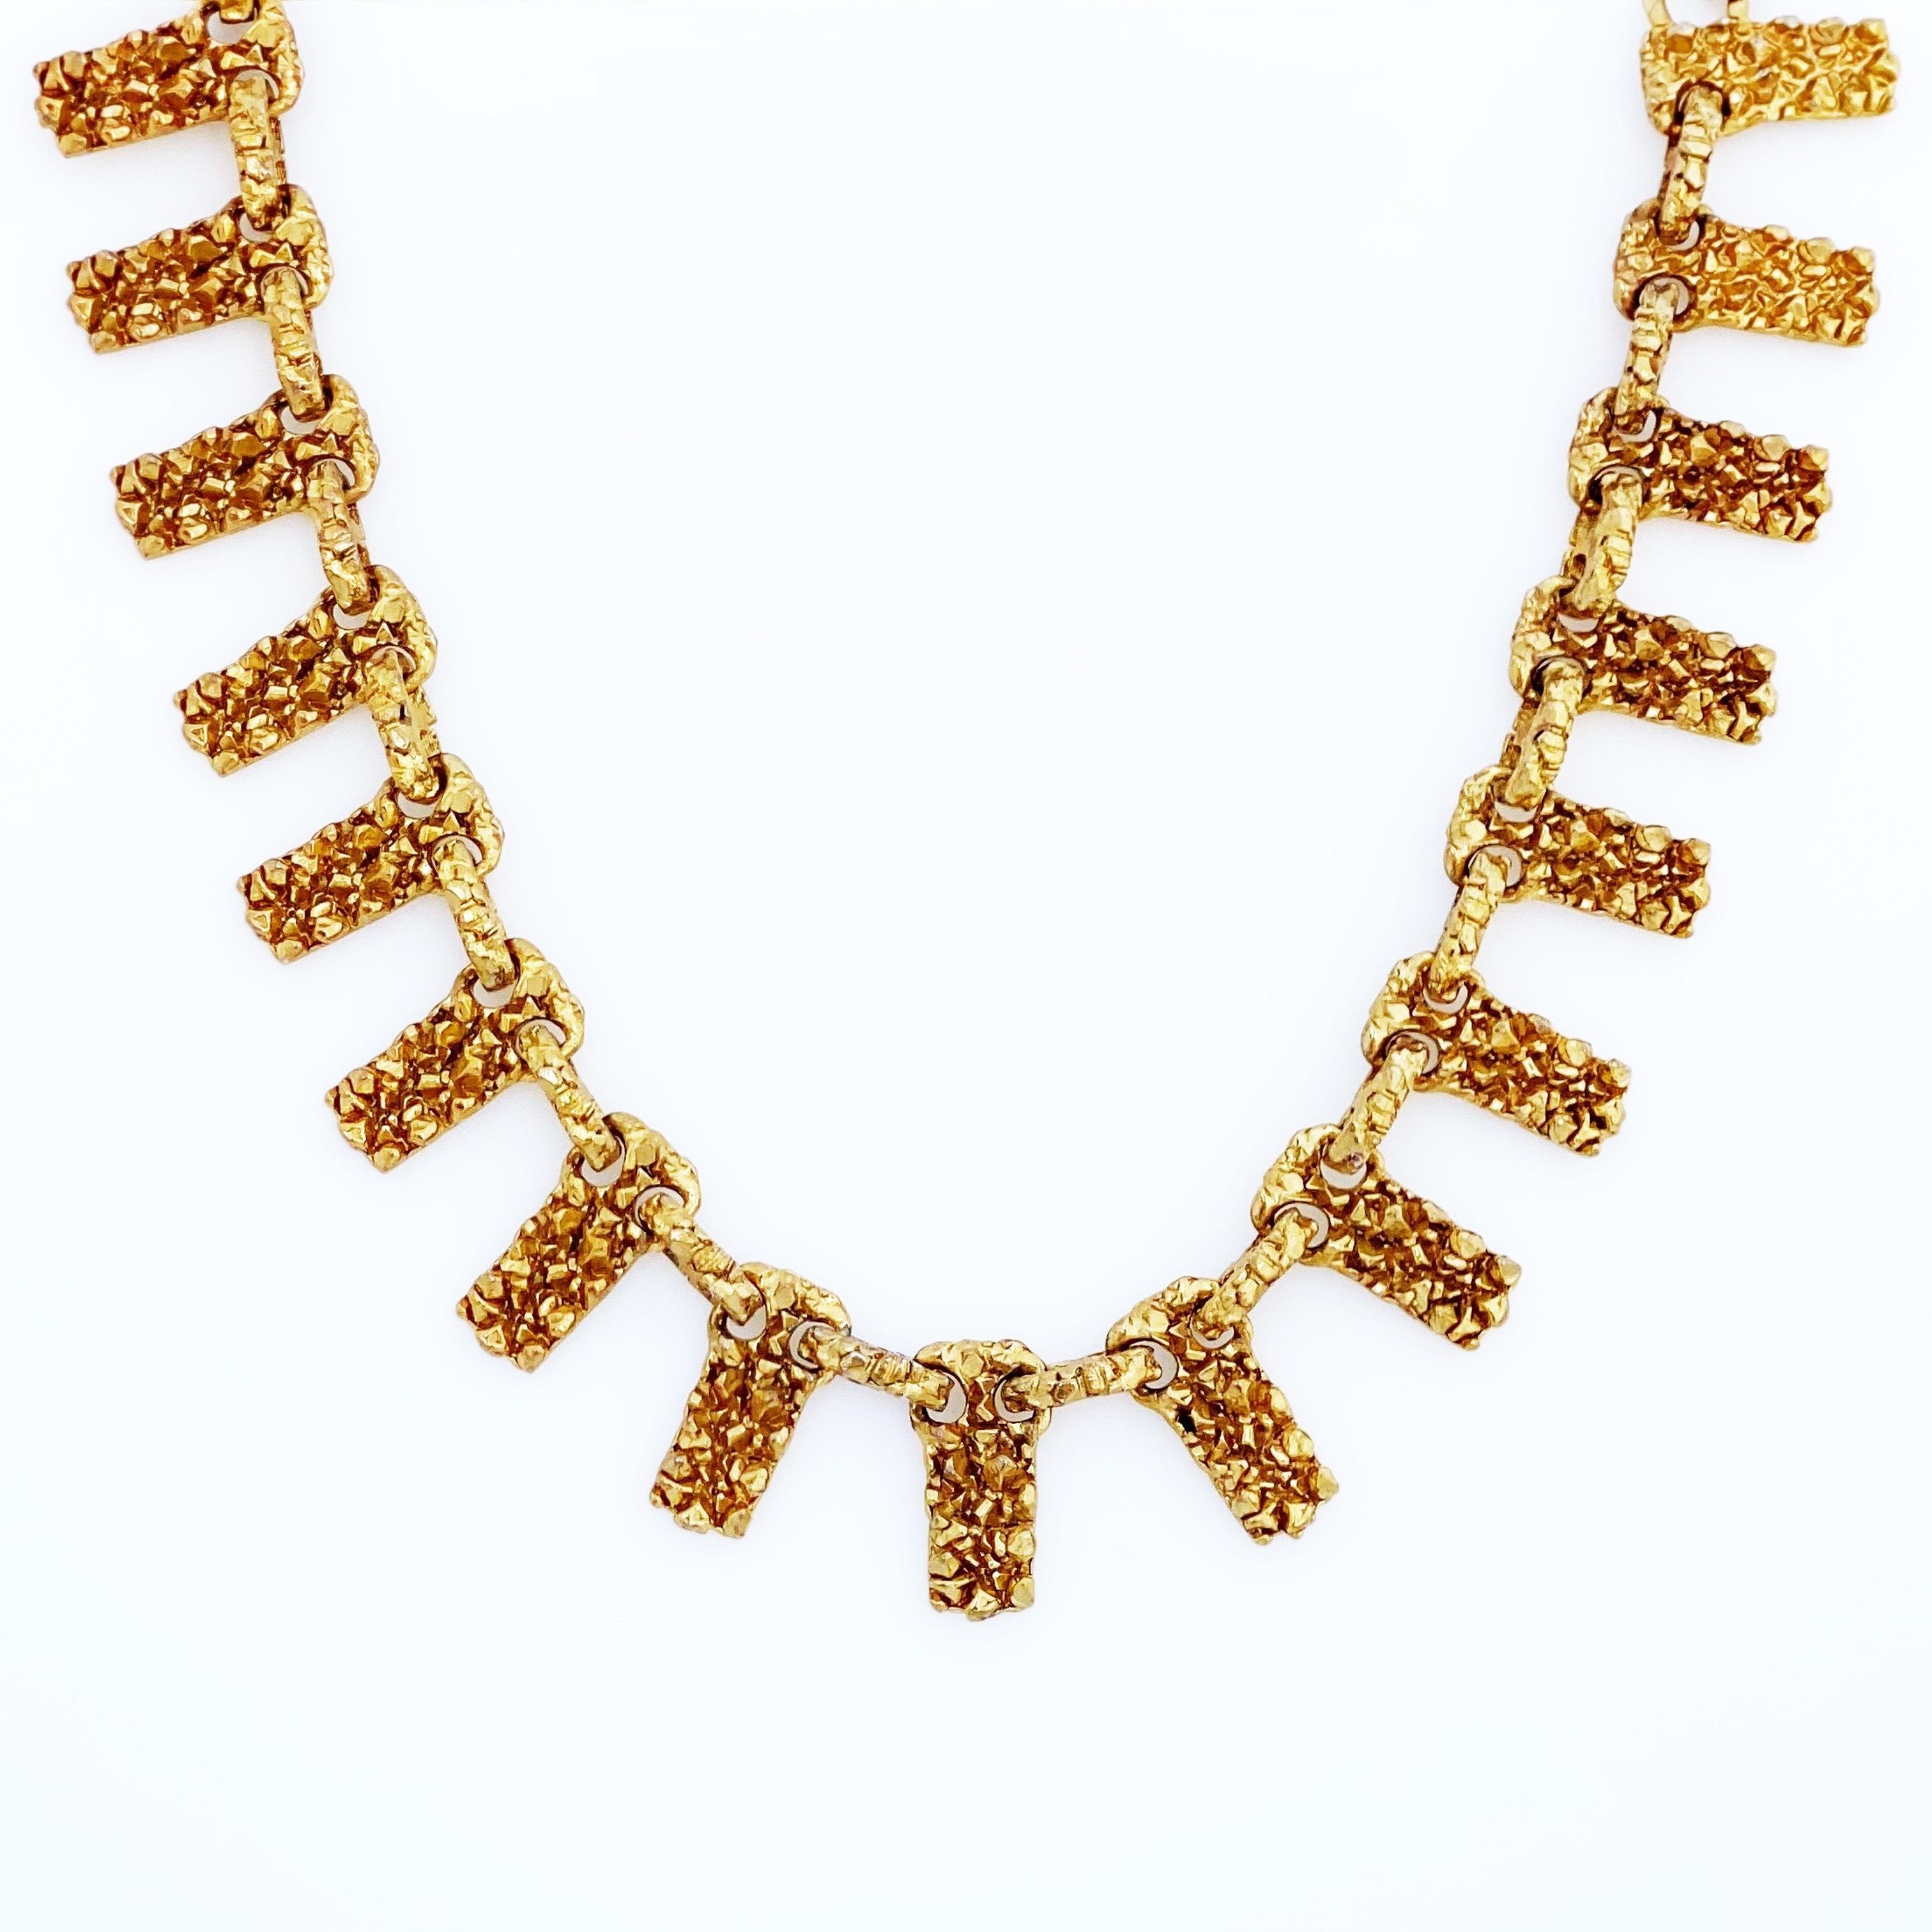 1970s necklace styles